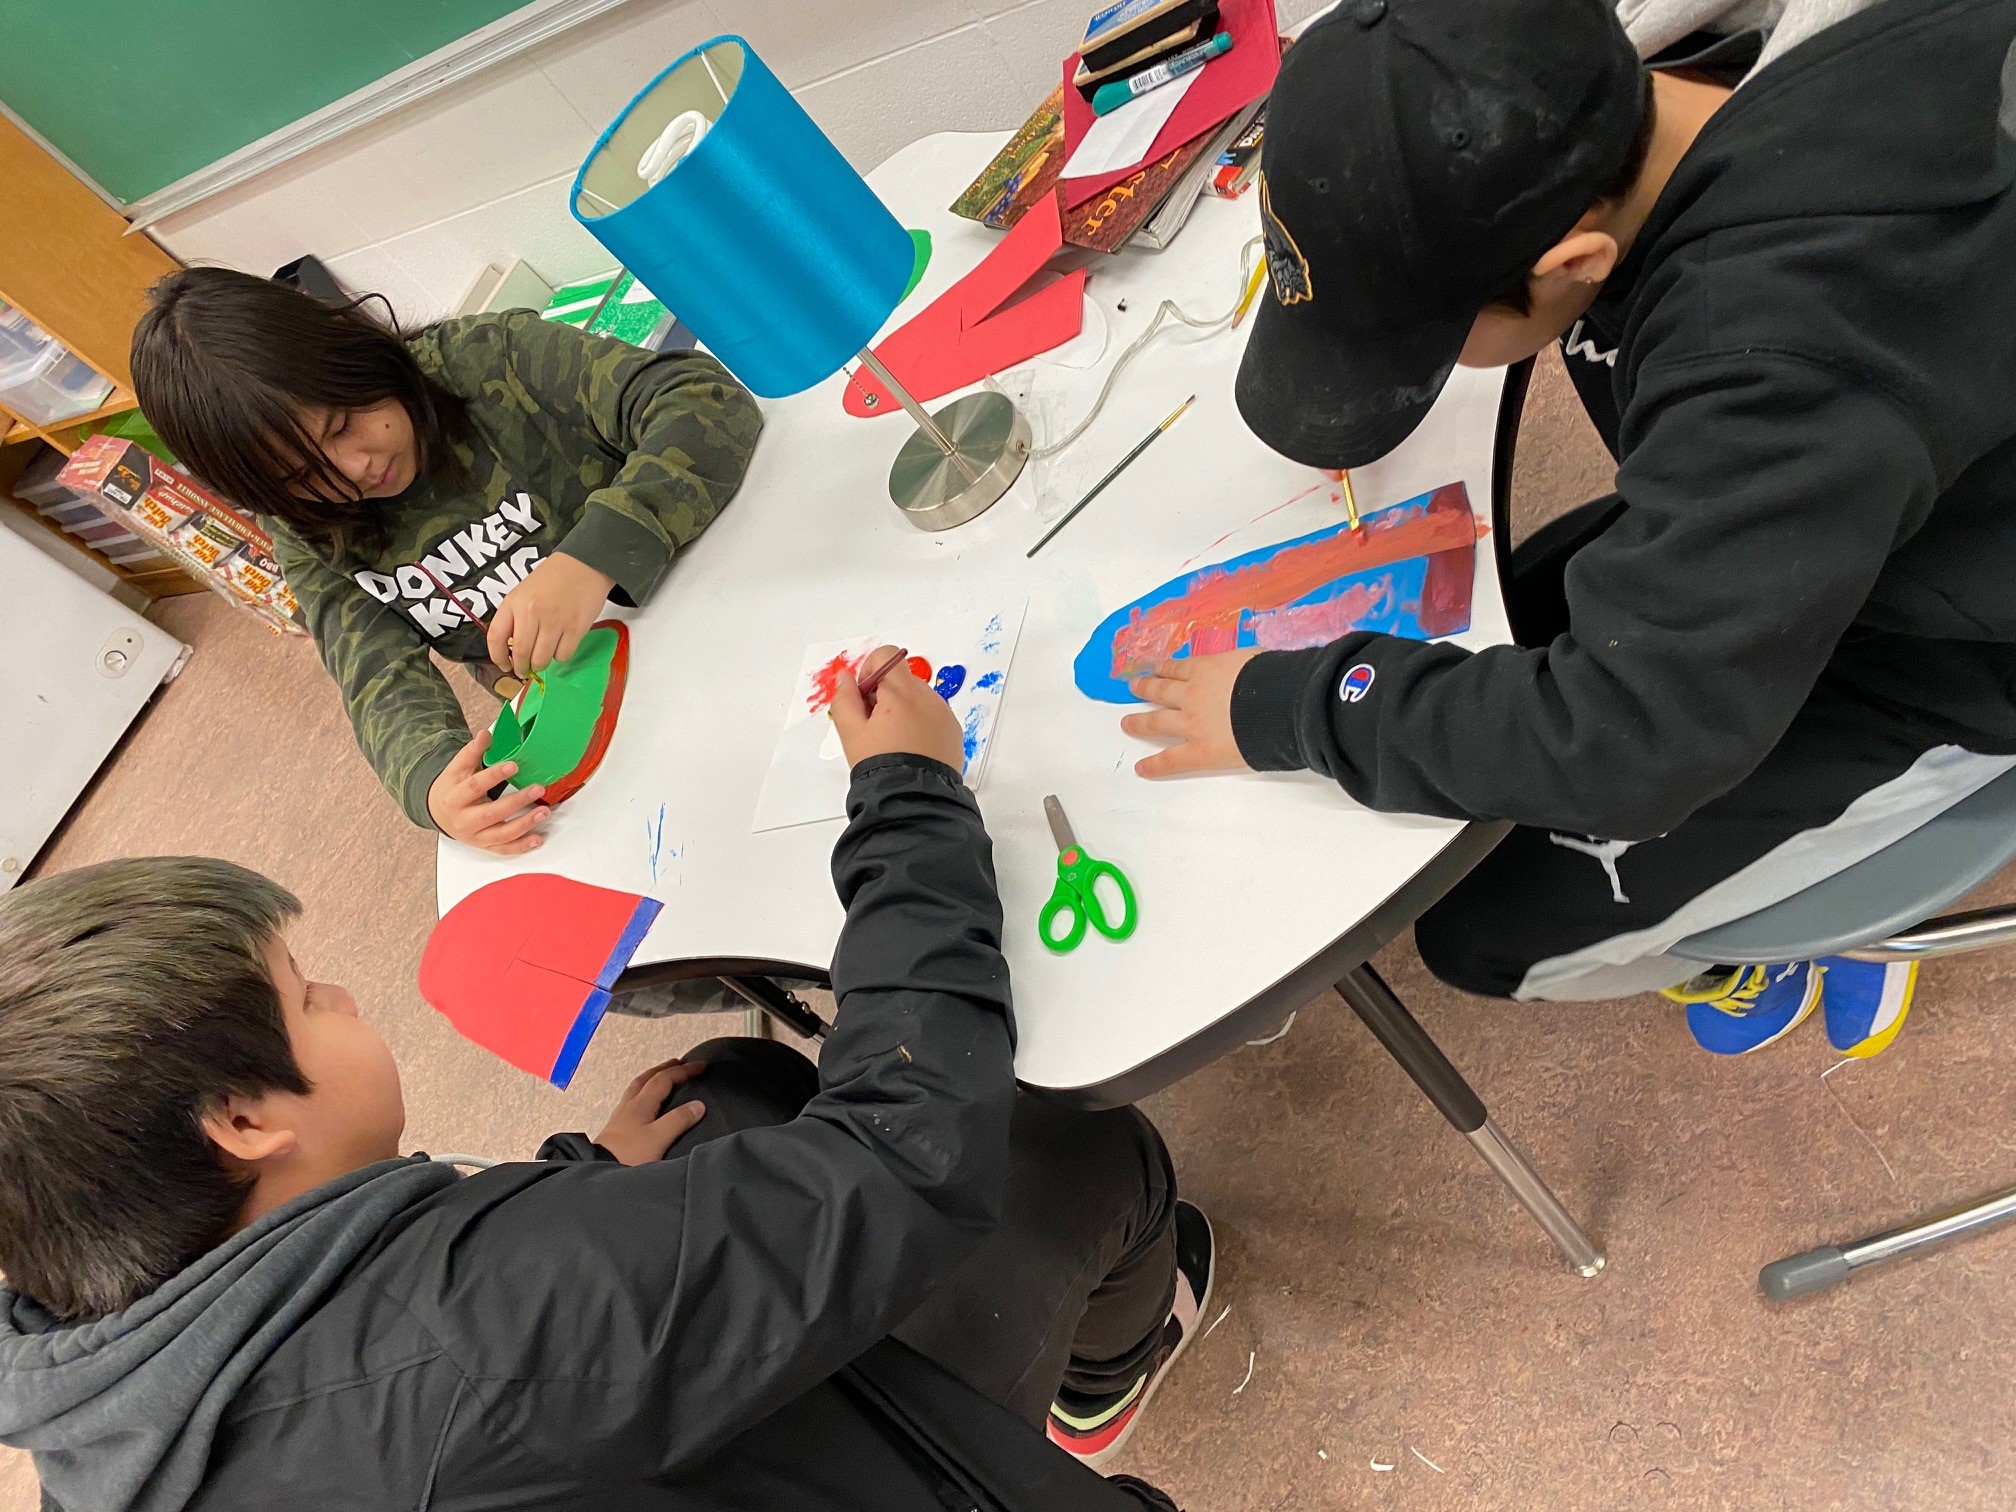 Three students create various kinds of artwork in a classroom.